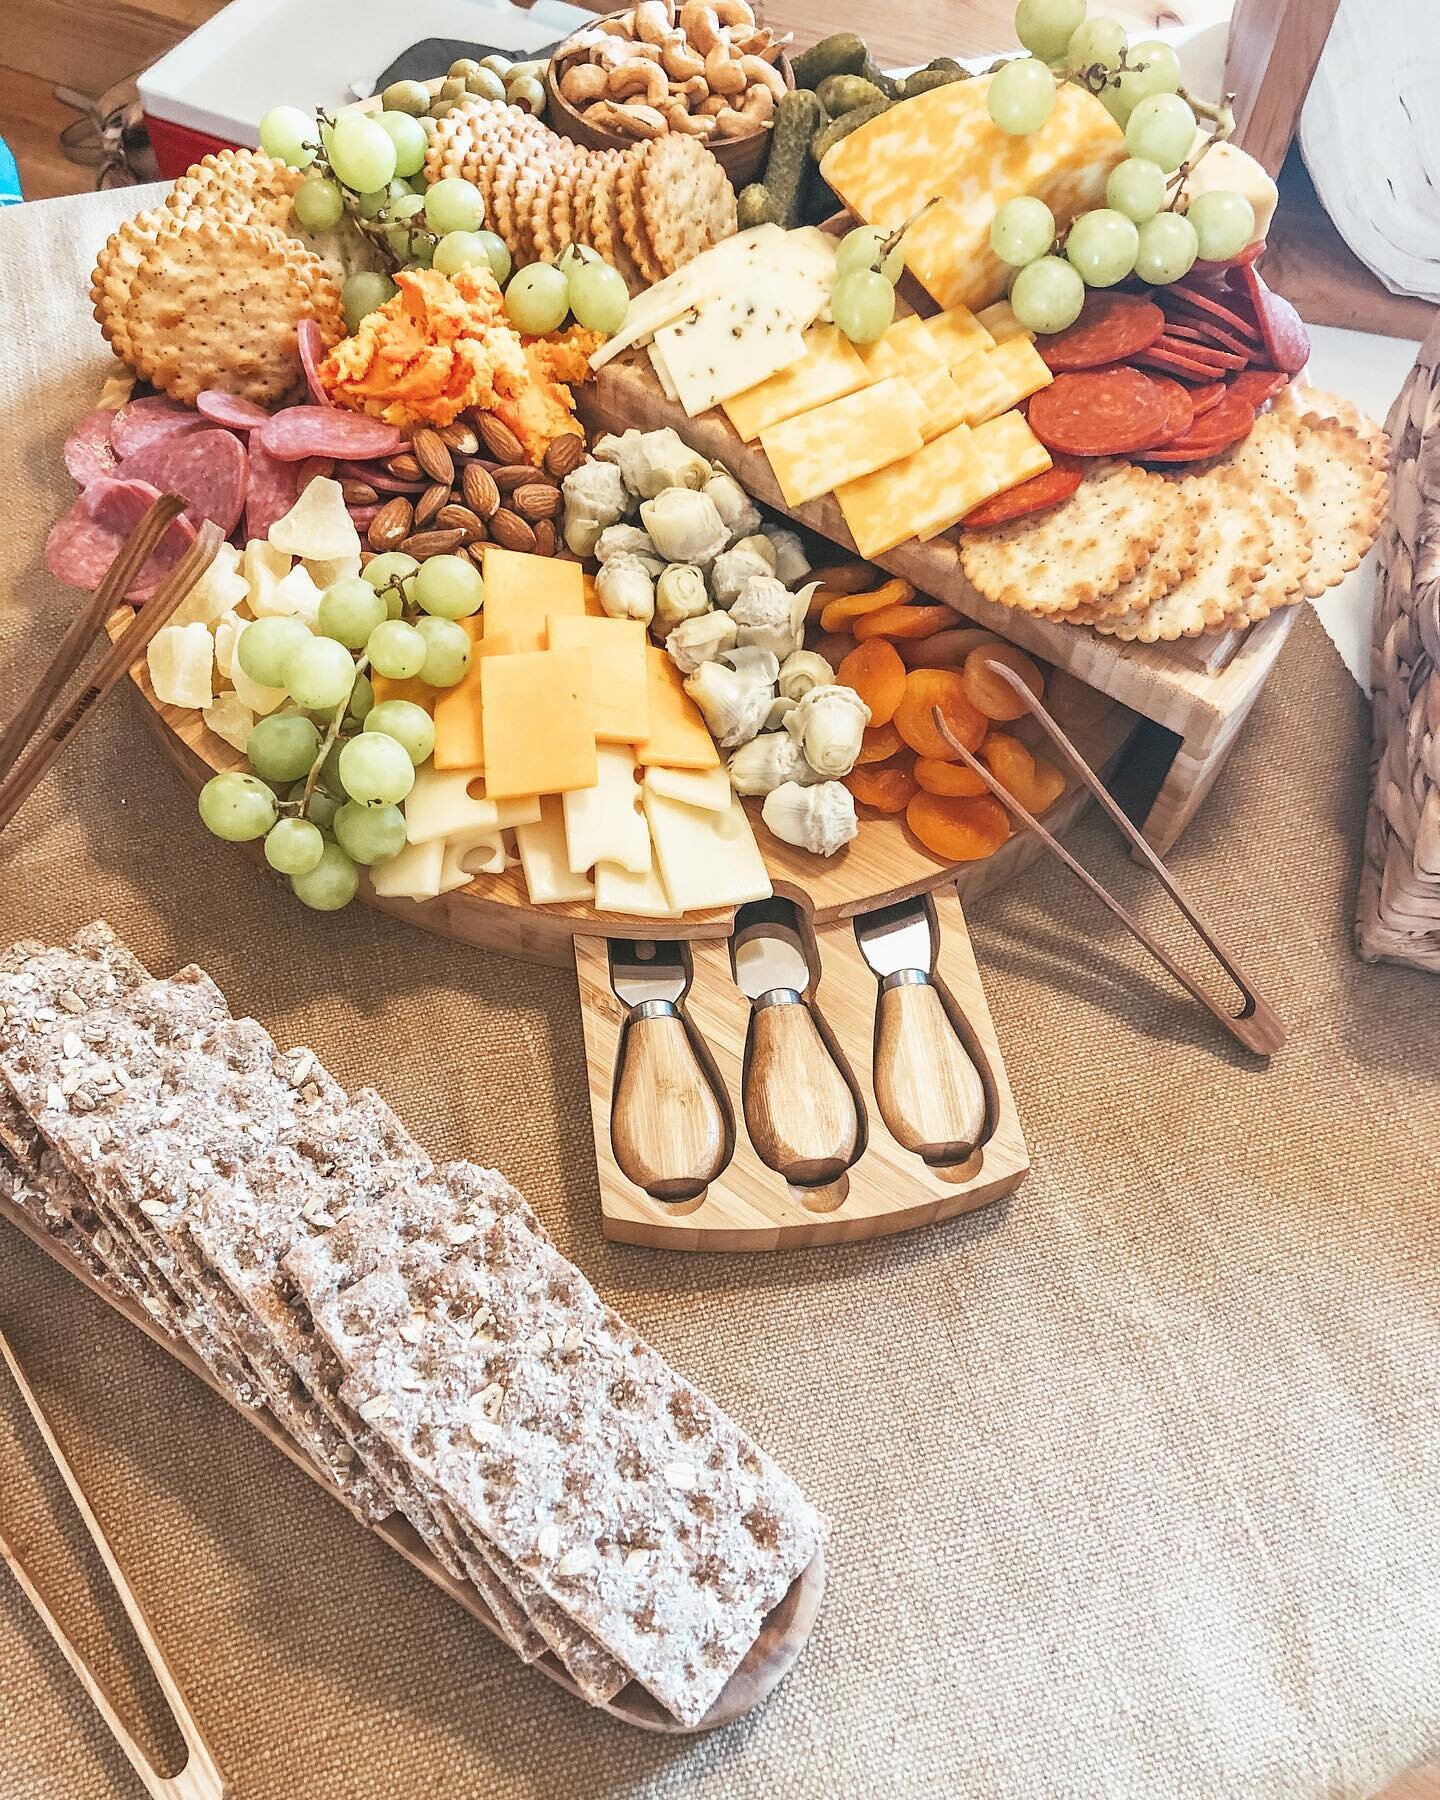 Sweet dreams are made of cheese...but really this charcuterie board is a dream.